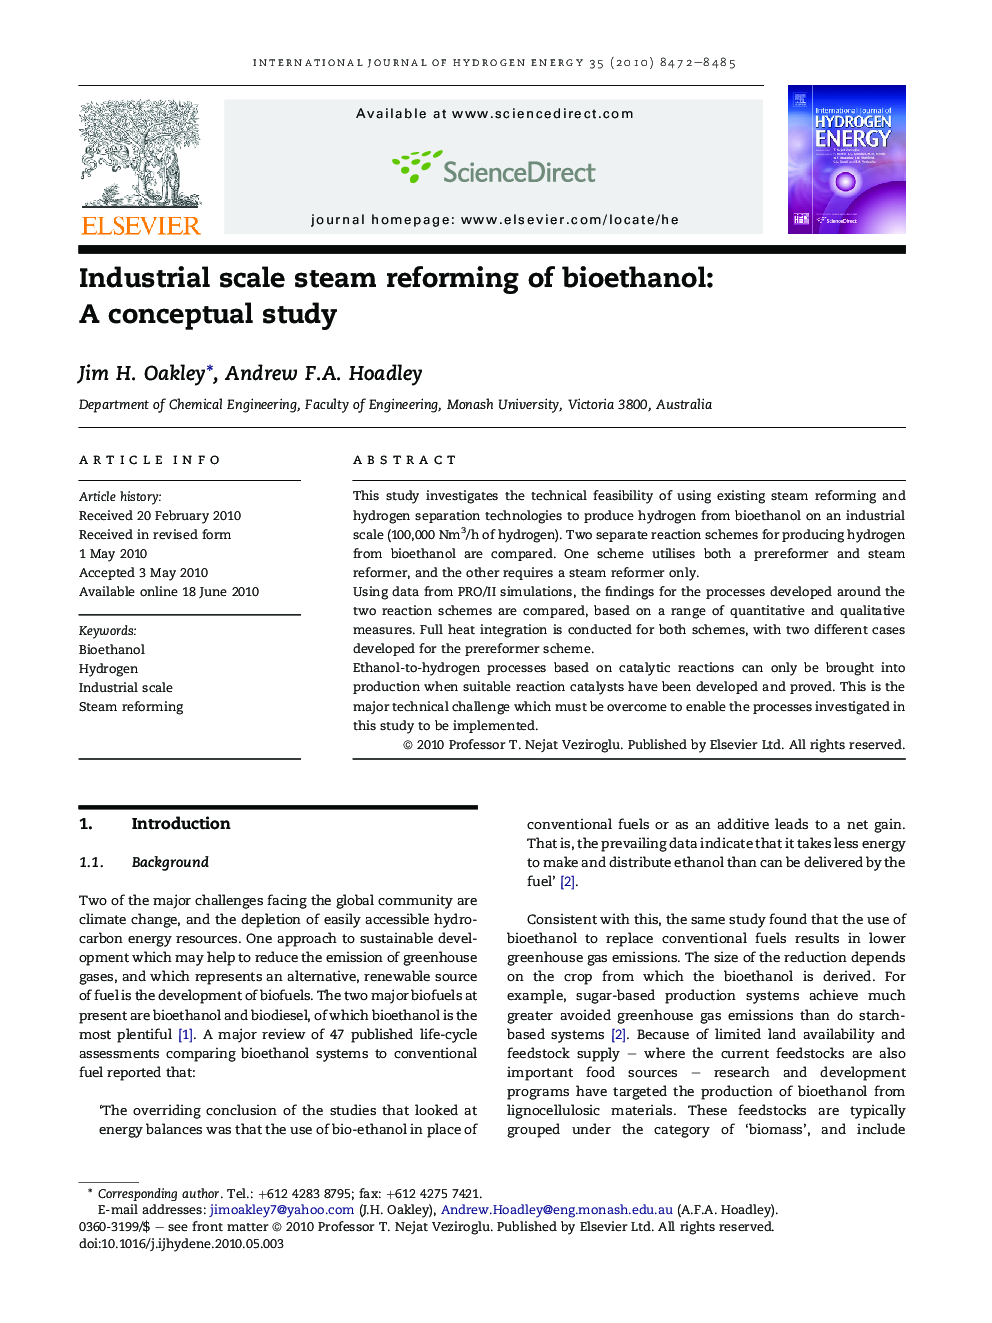 Industrial scale steam reforming of bioethanol: A conceptual study